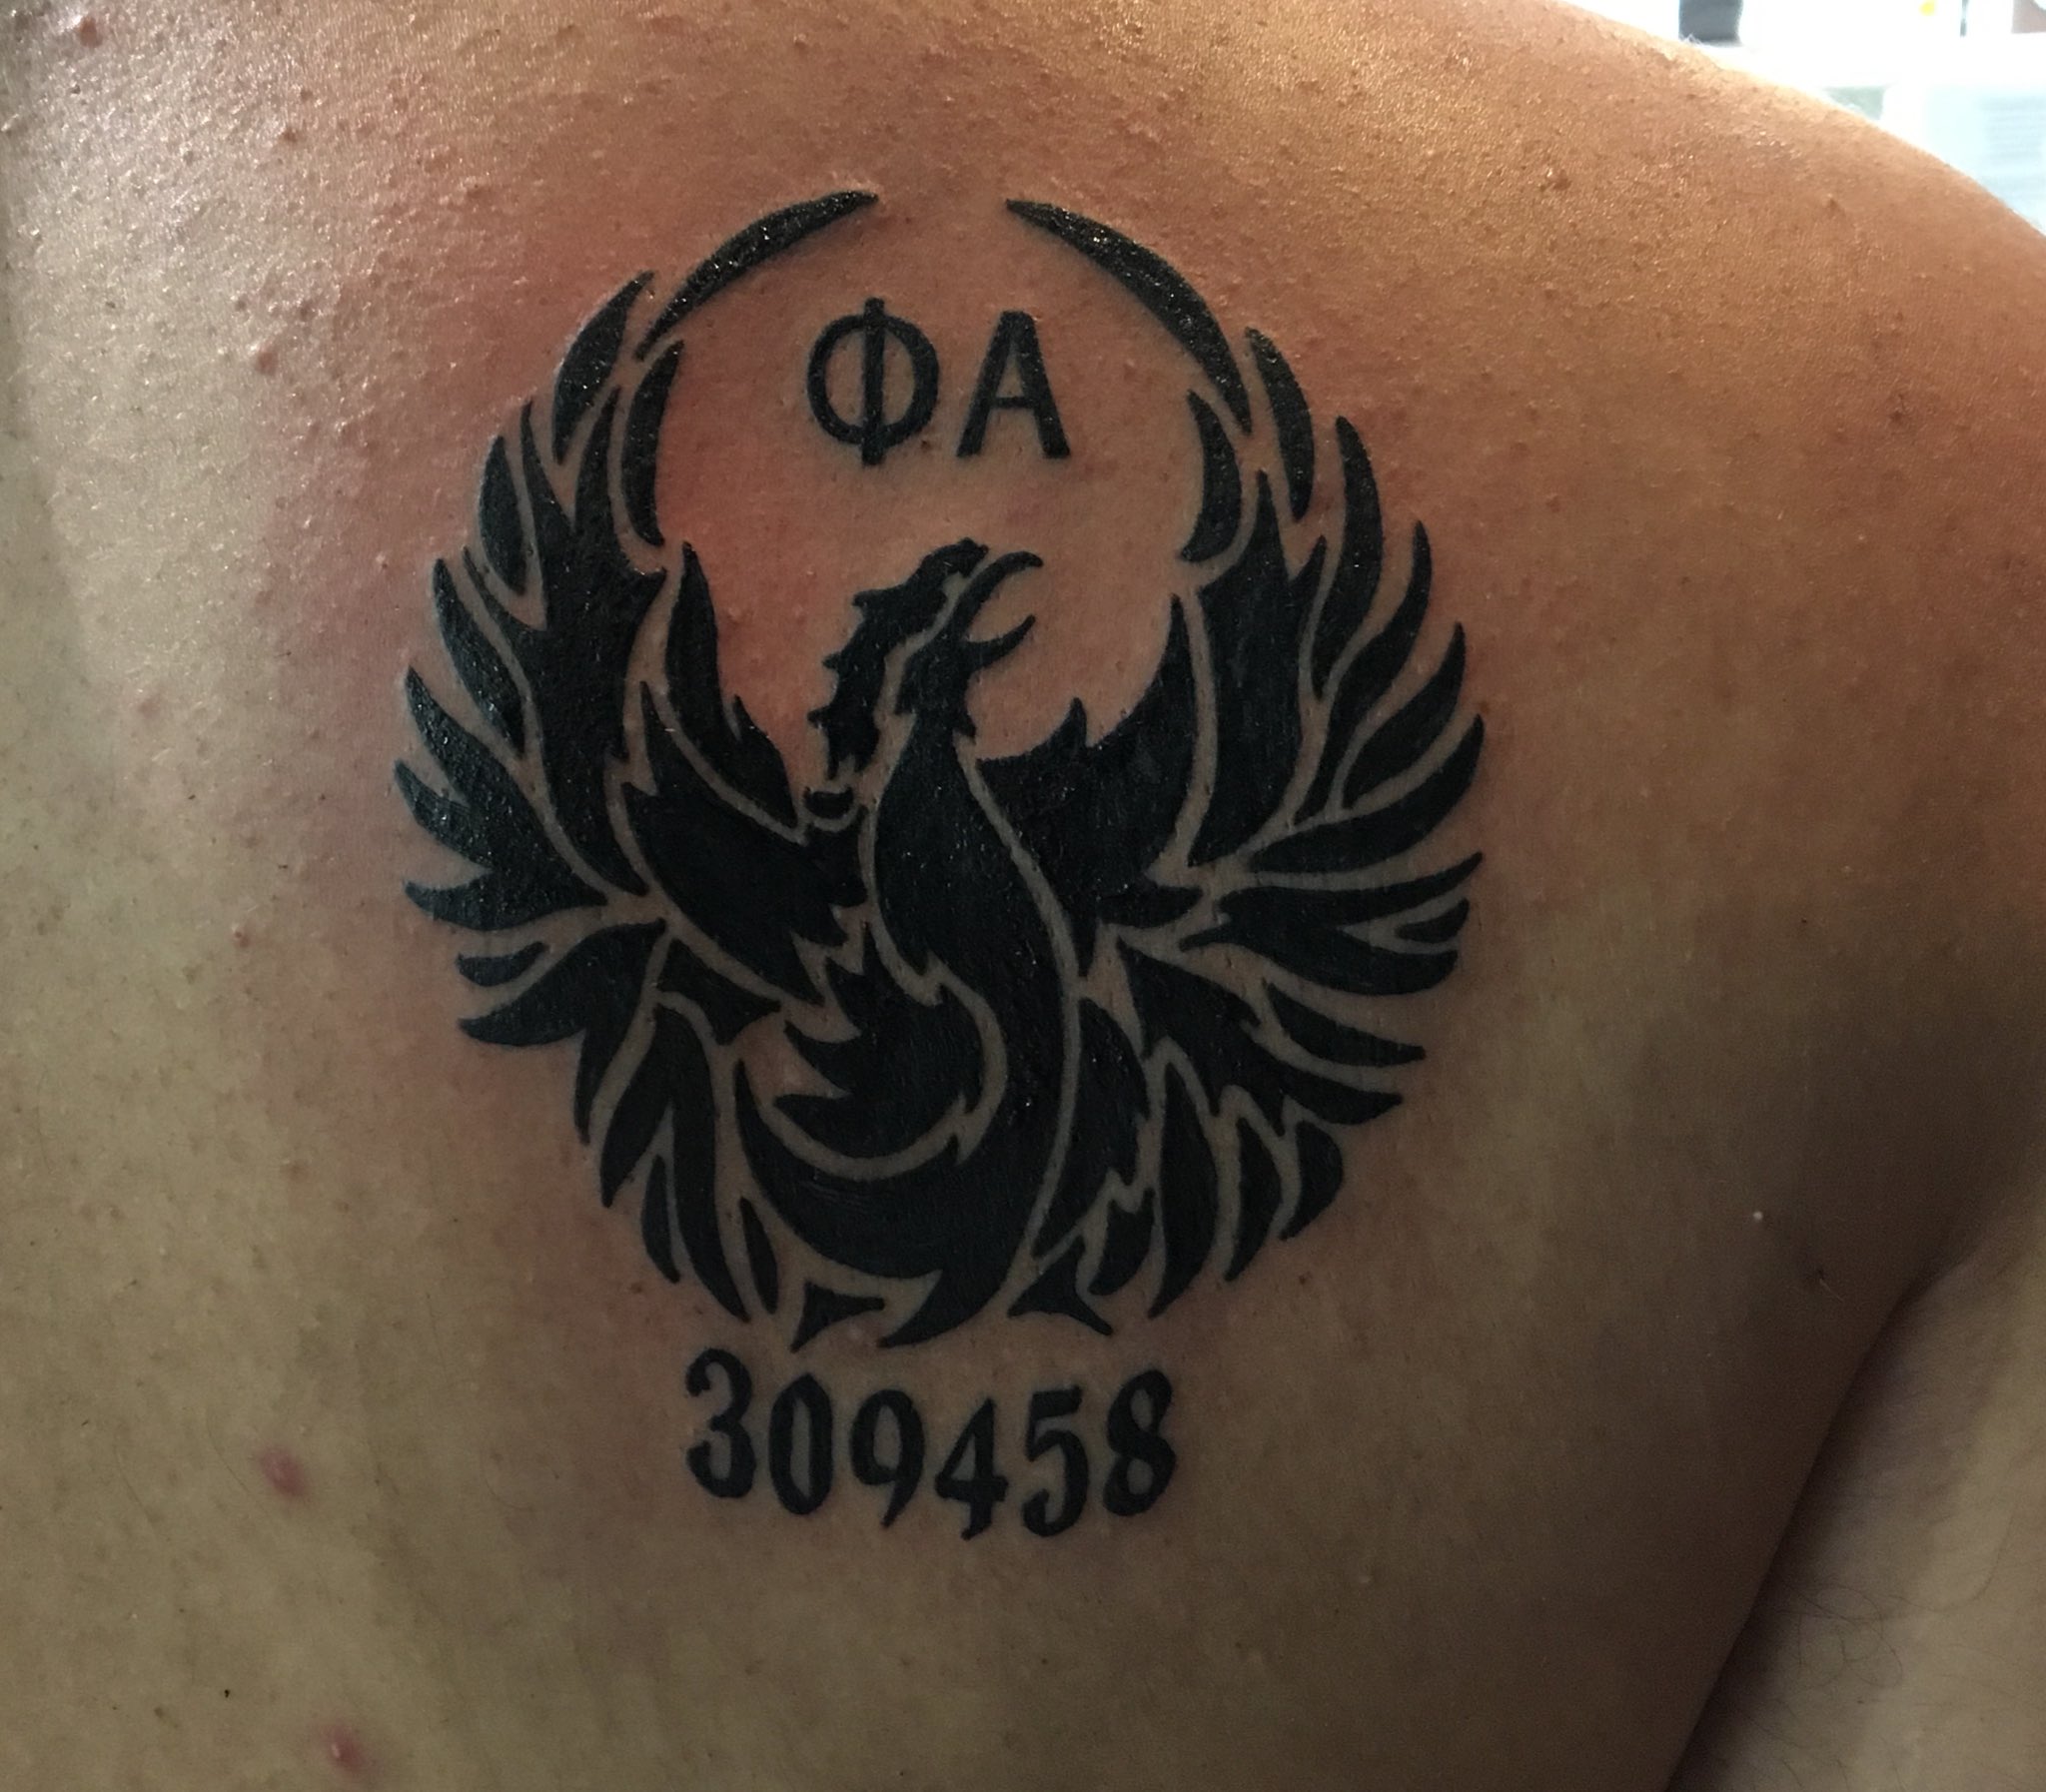 Cruz on X: "My first tattoo, because my fraternity and my brothers have helped me get to where I am today #SAE #ΦΑ #Phoenix https://t.co/bZXnsOAt51" / X